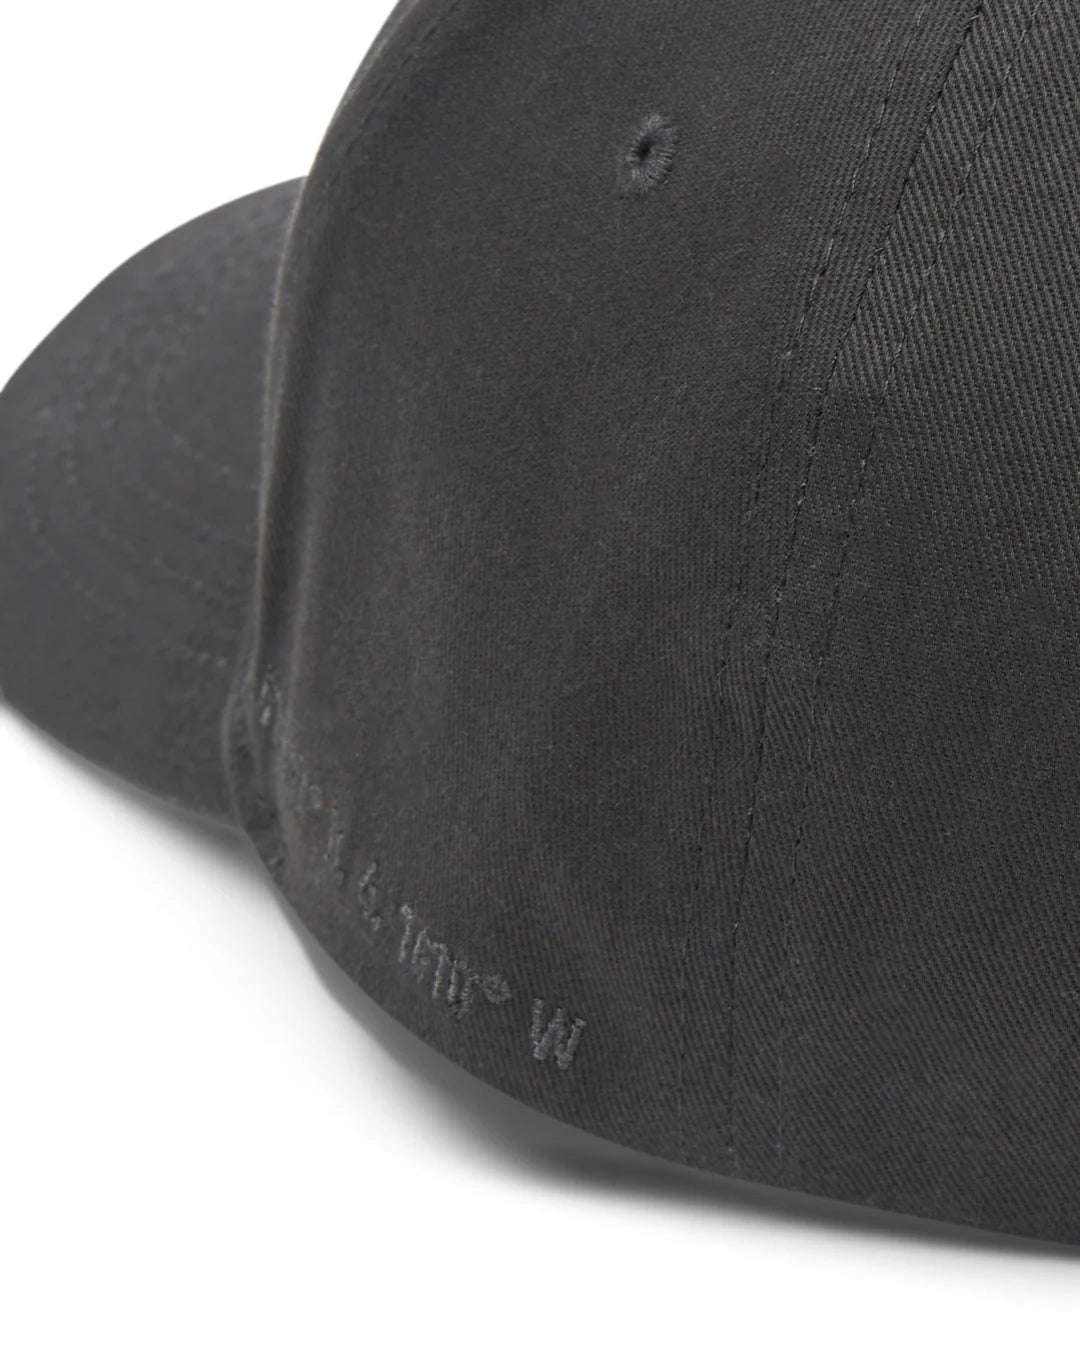 Saltrock adults Dockyard Cap in Dark Grey with embroidered Saltrock HQ co-ordinates on the side.